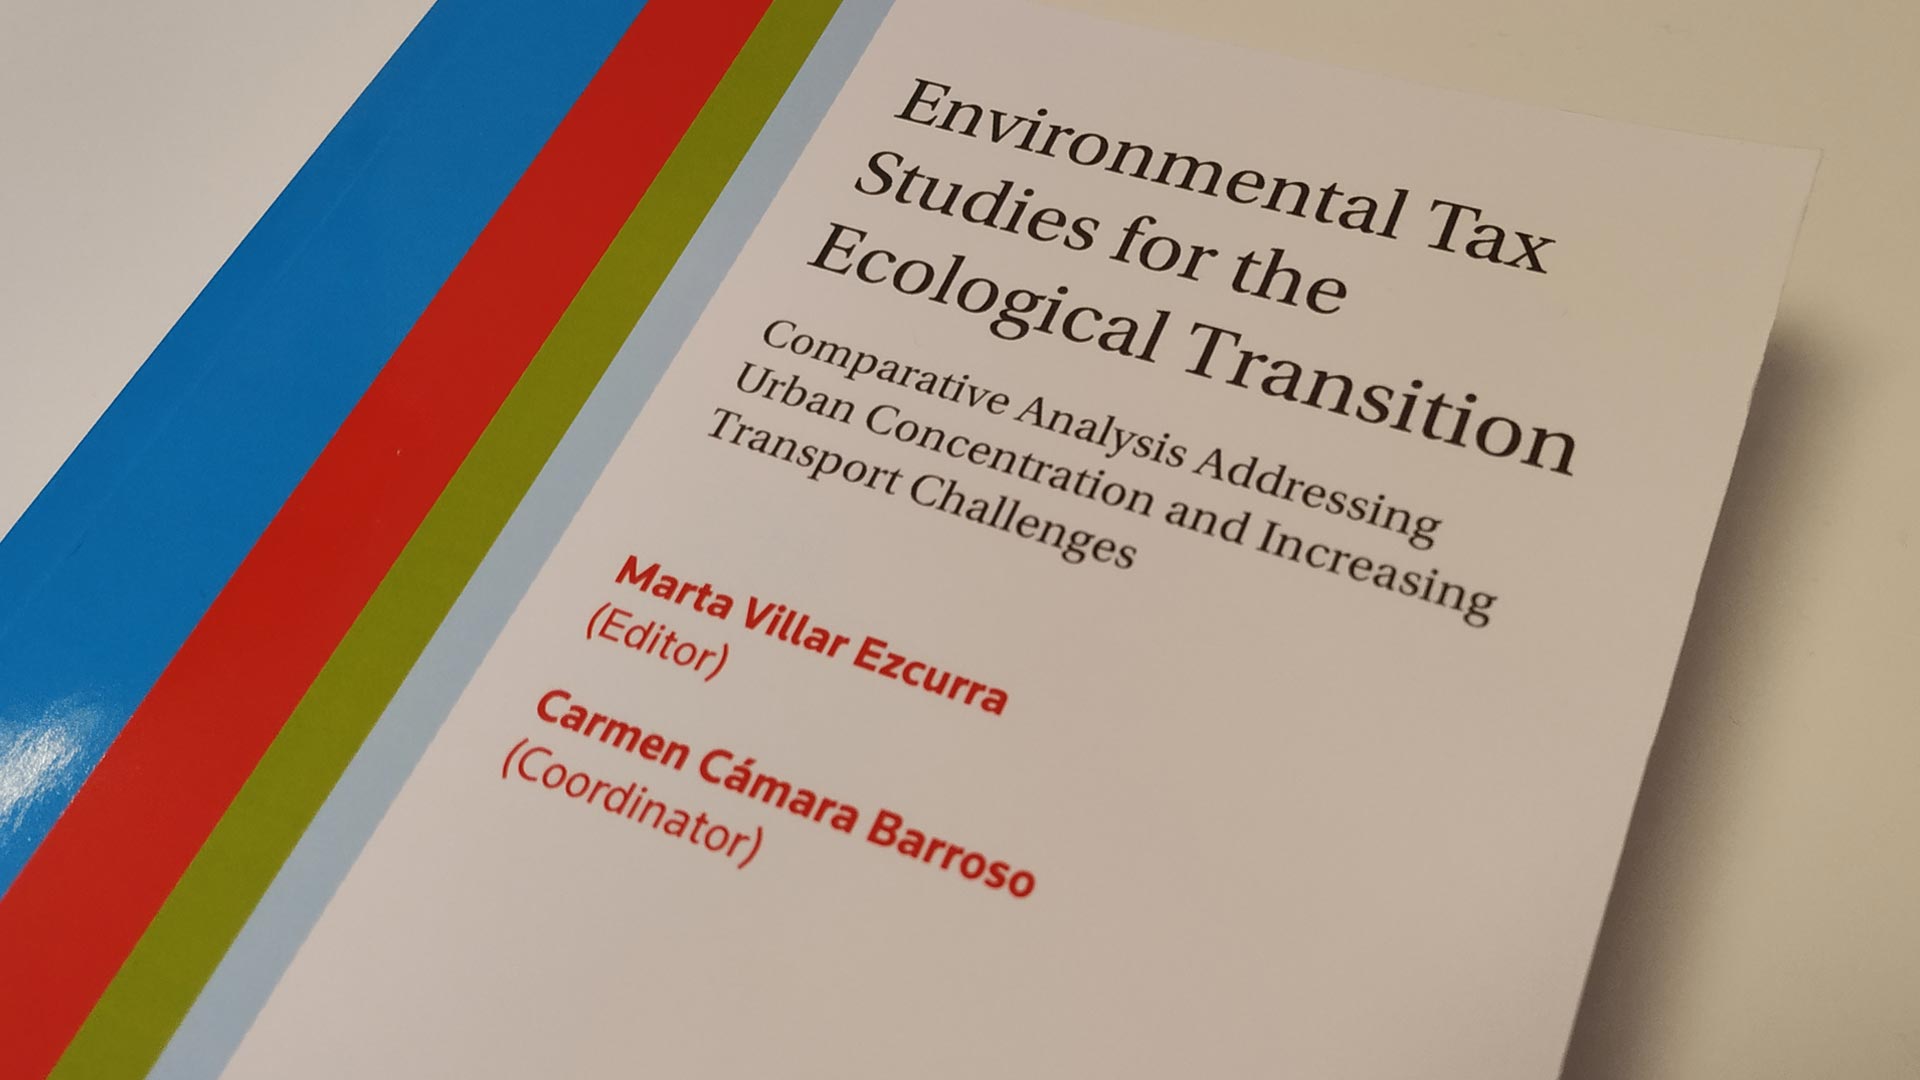 “Taxes on Air Pollution in Spain”, new article by ENT members in the book Environmental Tax Studies for the Ecological Transition